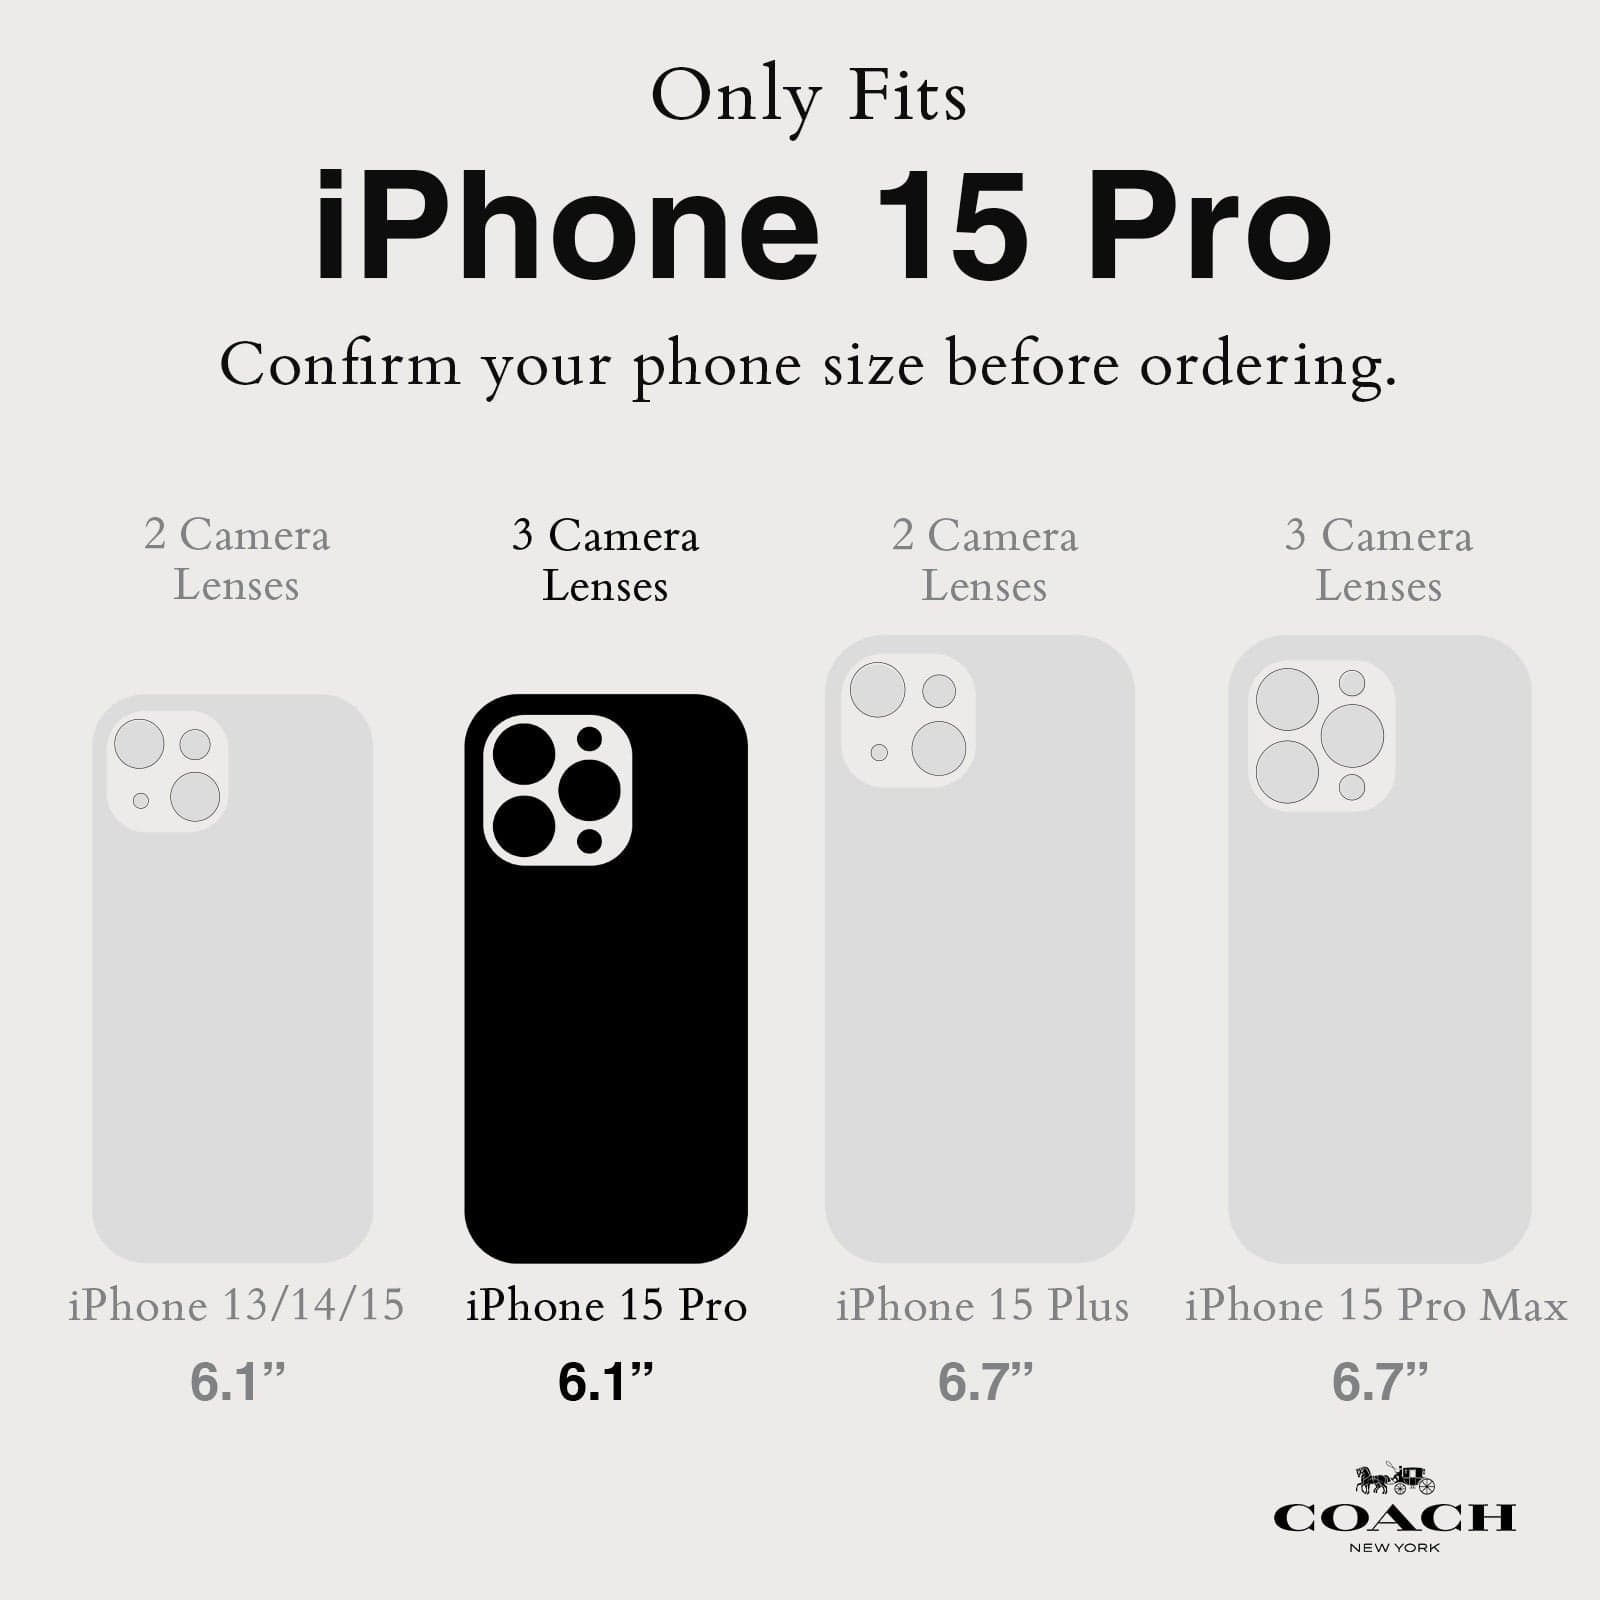 ONLY FITS IPHONE 15 PRO